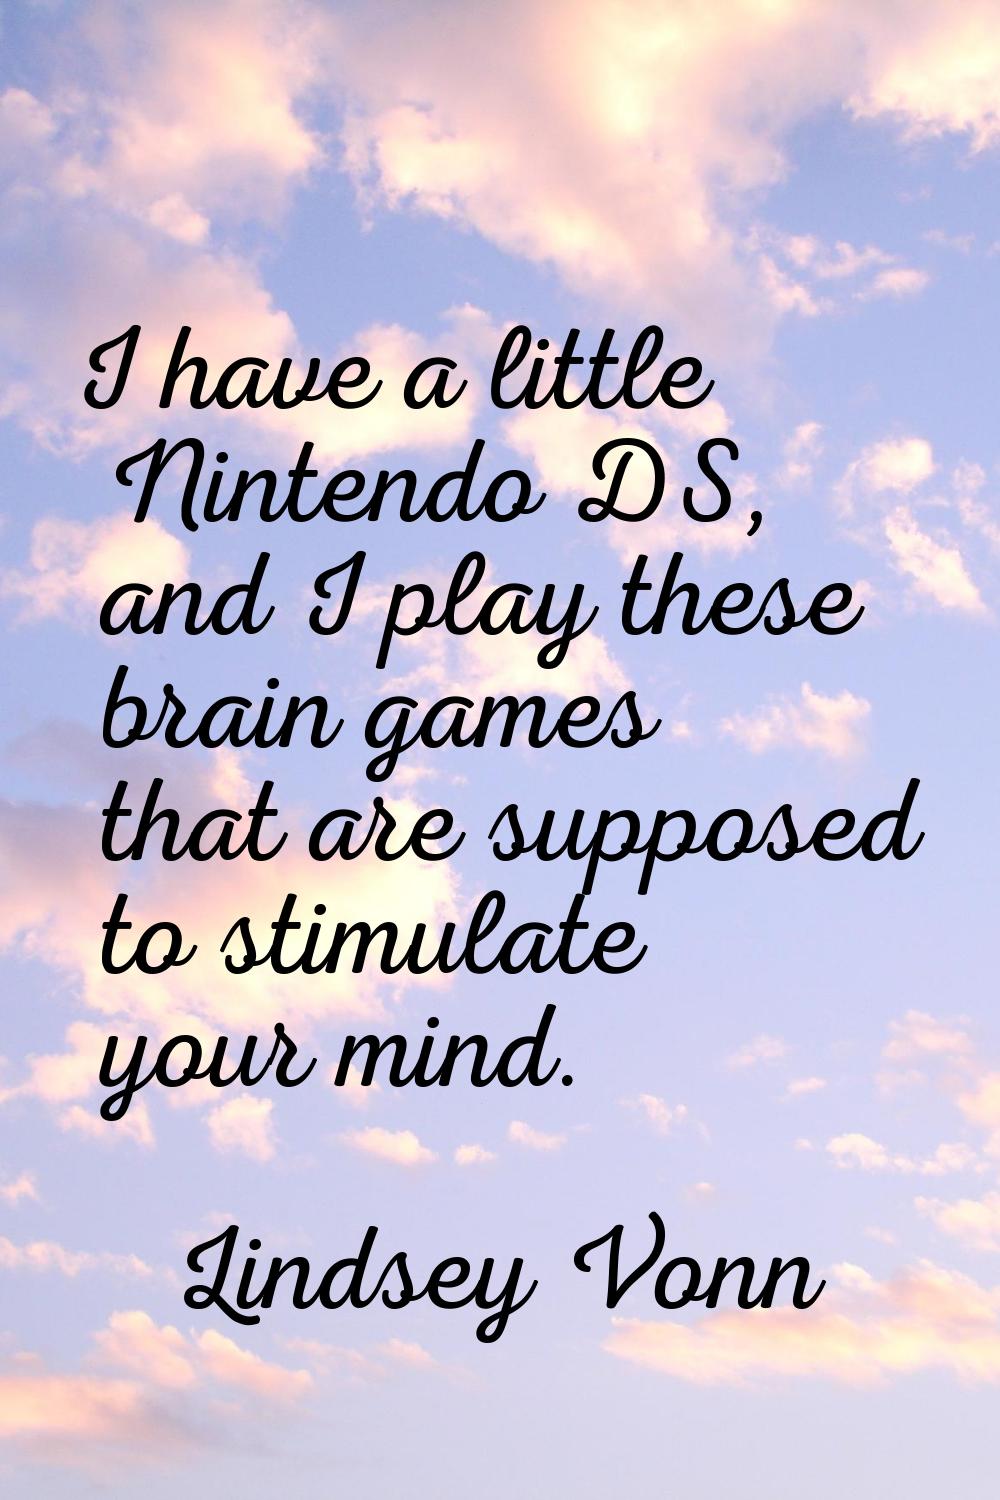 I have a little Nintendo DS, and I play these brain games that are supposed to stimulate your mind.